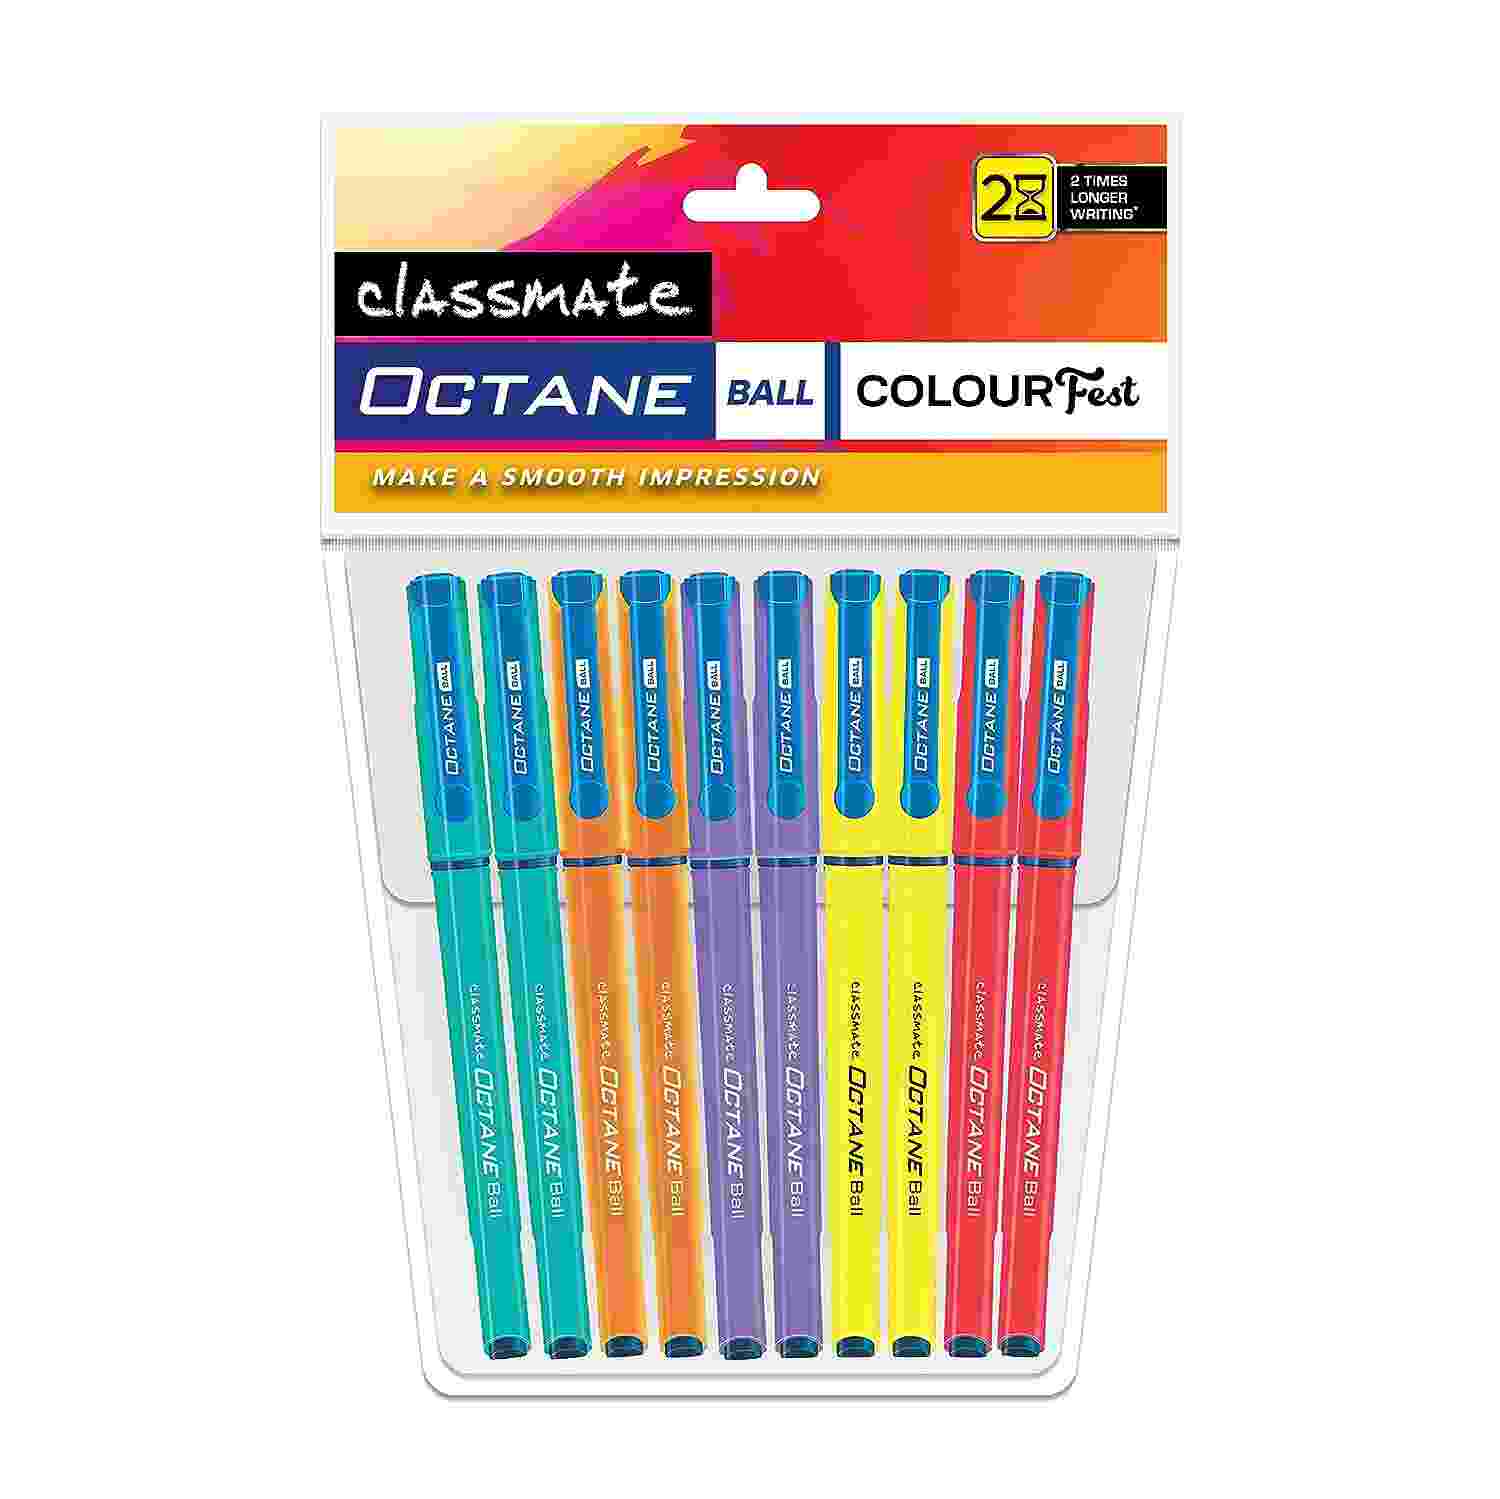 Classmate Octane Colour Fest- Blue Ball Pens (Pack of 20) | Smooth & Fast Writing Ball Pens | Attractive Body Colours|Comfortable to Hold & Write|School & Office Stationery|Work from Home Essentials